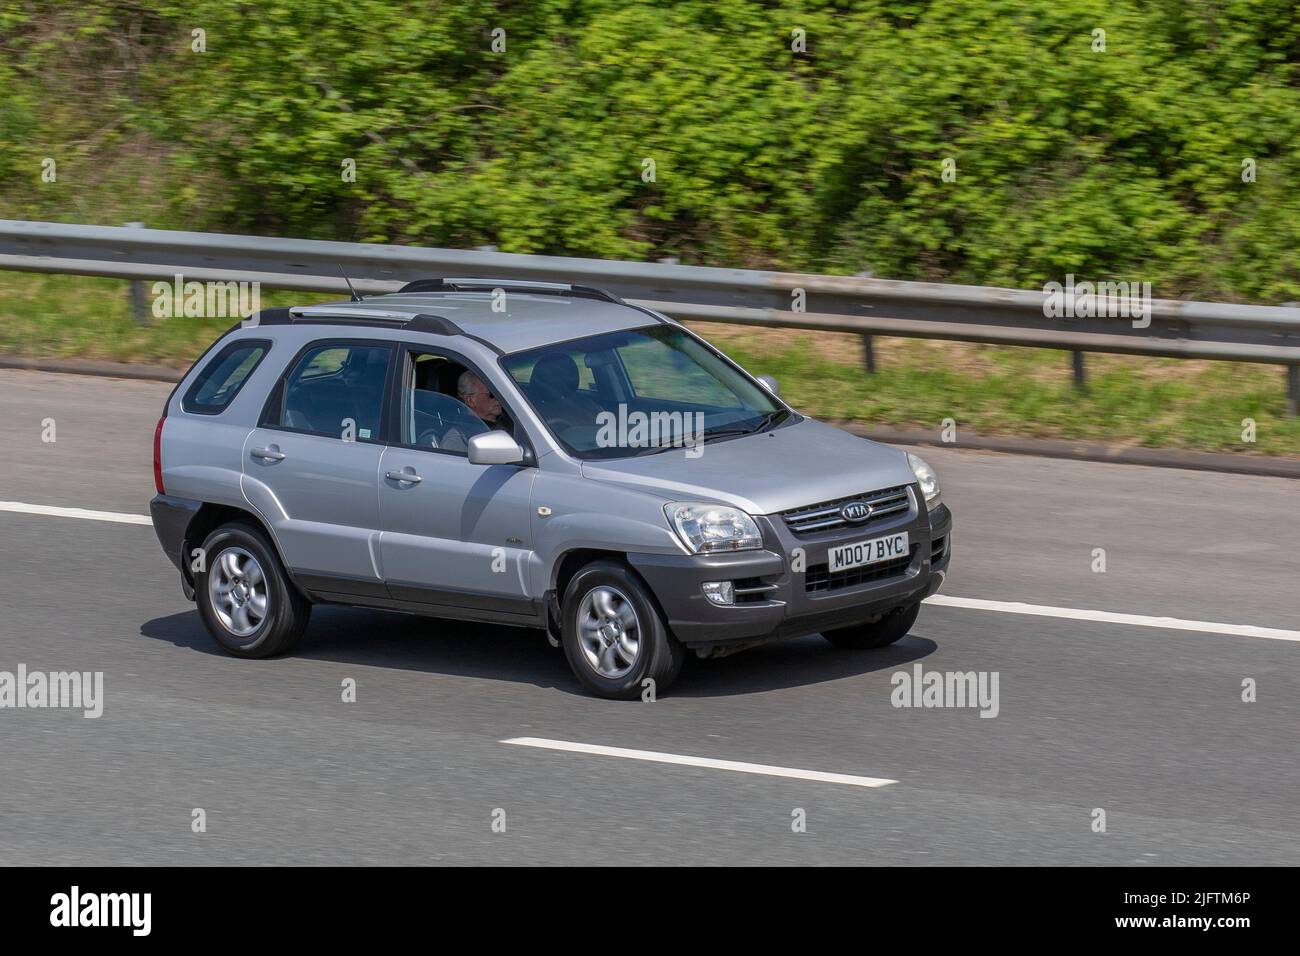 2007 Silver KIA Sportage Xe Crdi 138 1991cc Diesel SUV; driving on the M6 Motorway, Manchester, UK Stock Photo